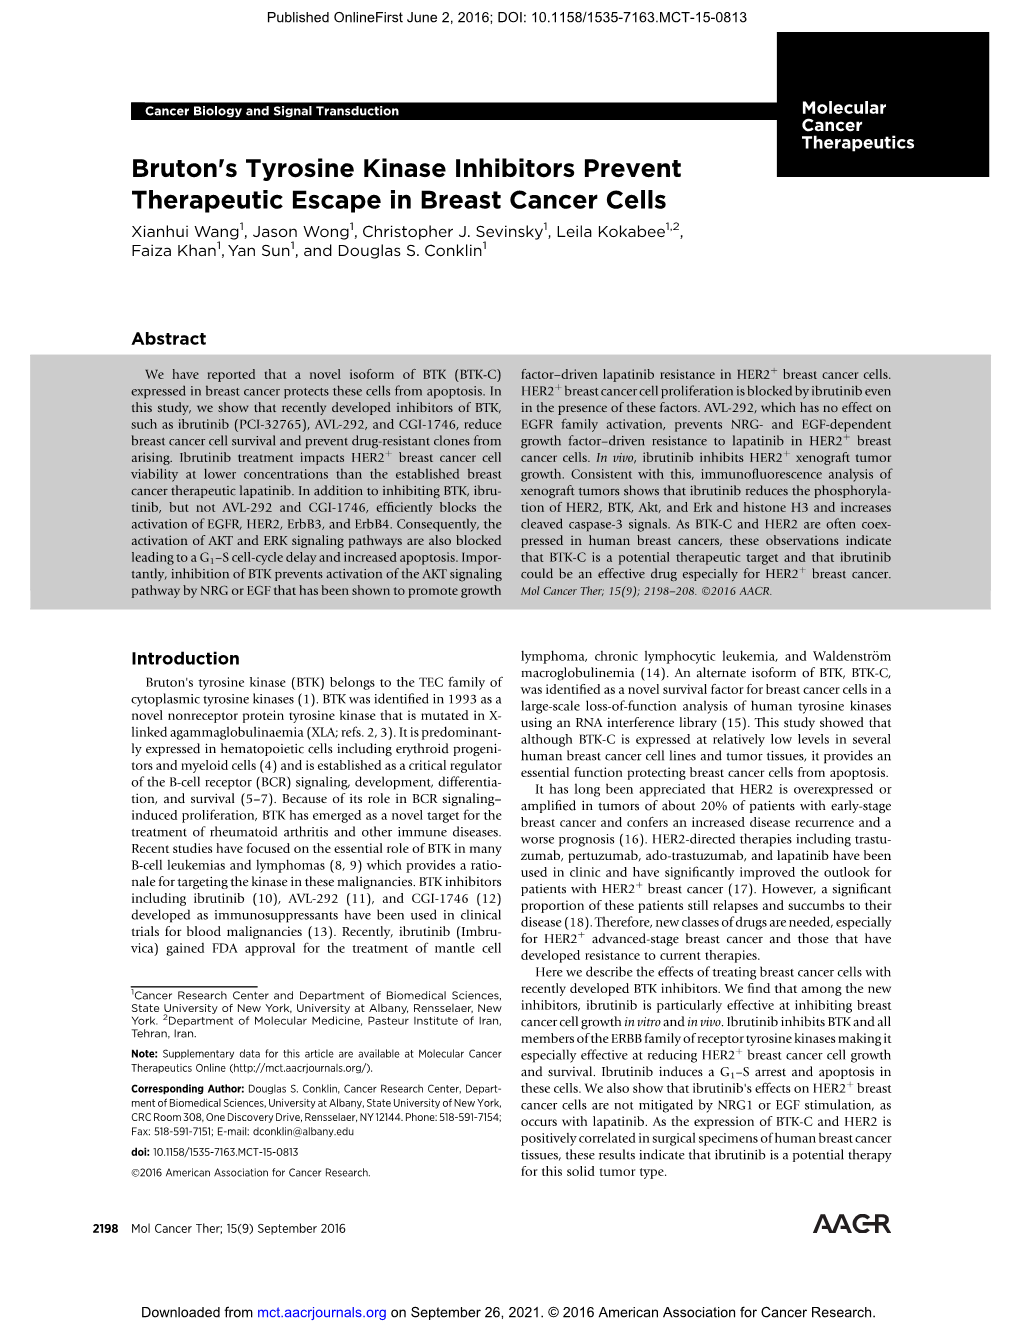 Bruton's Tyrosine Kinase Inhibitors Prevent Therapeutic Escape in Breast Cancer Cells Xianhui Wang1, Jason Wong1, Christopher J